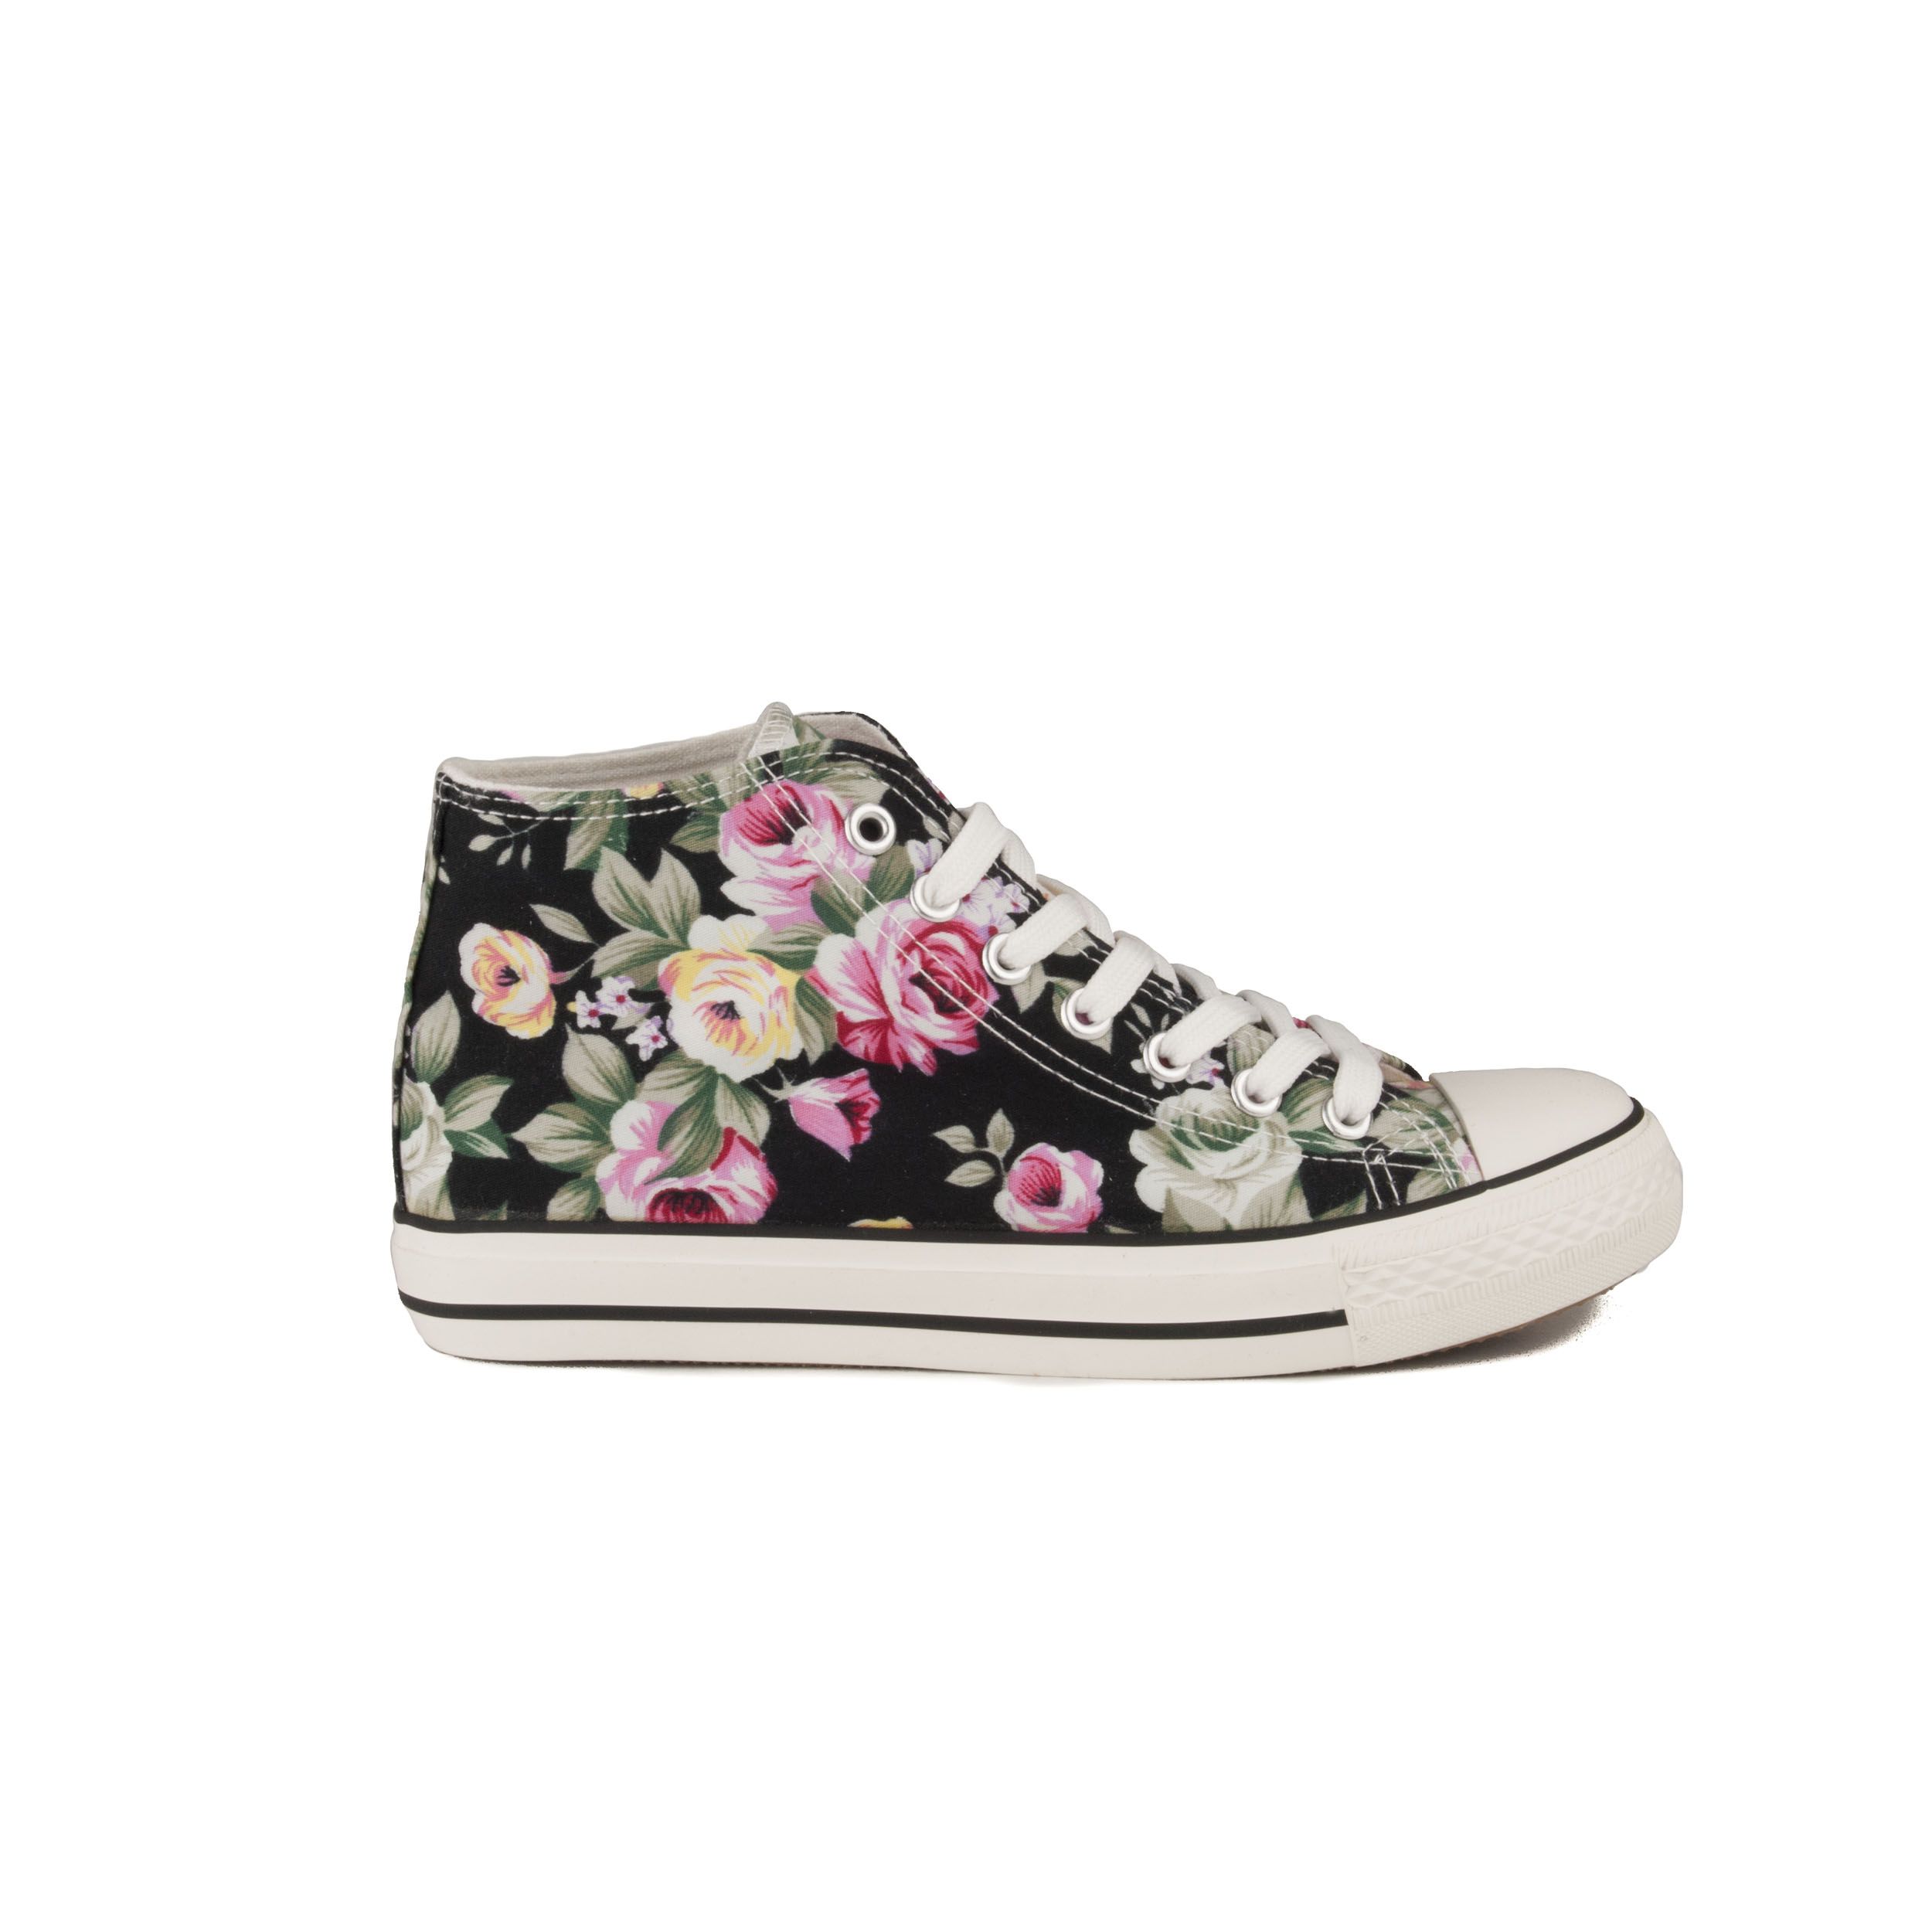 Flowers and more flowers. Alegria and comfort for spring. Padded template and anti-slip rubber floor for a perfect sneaker.